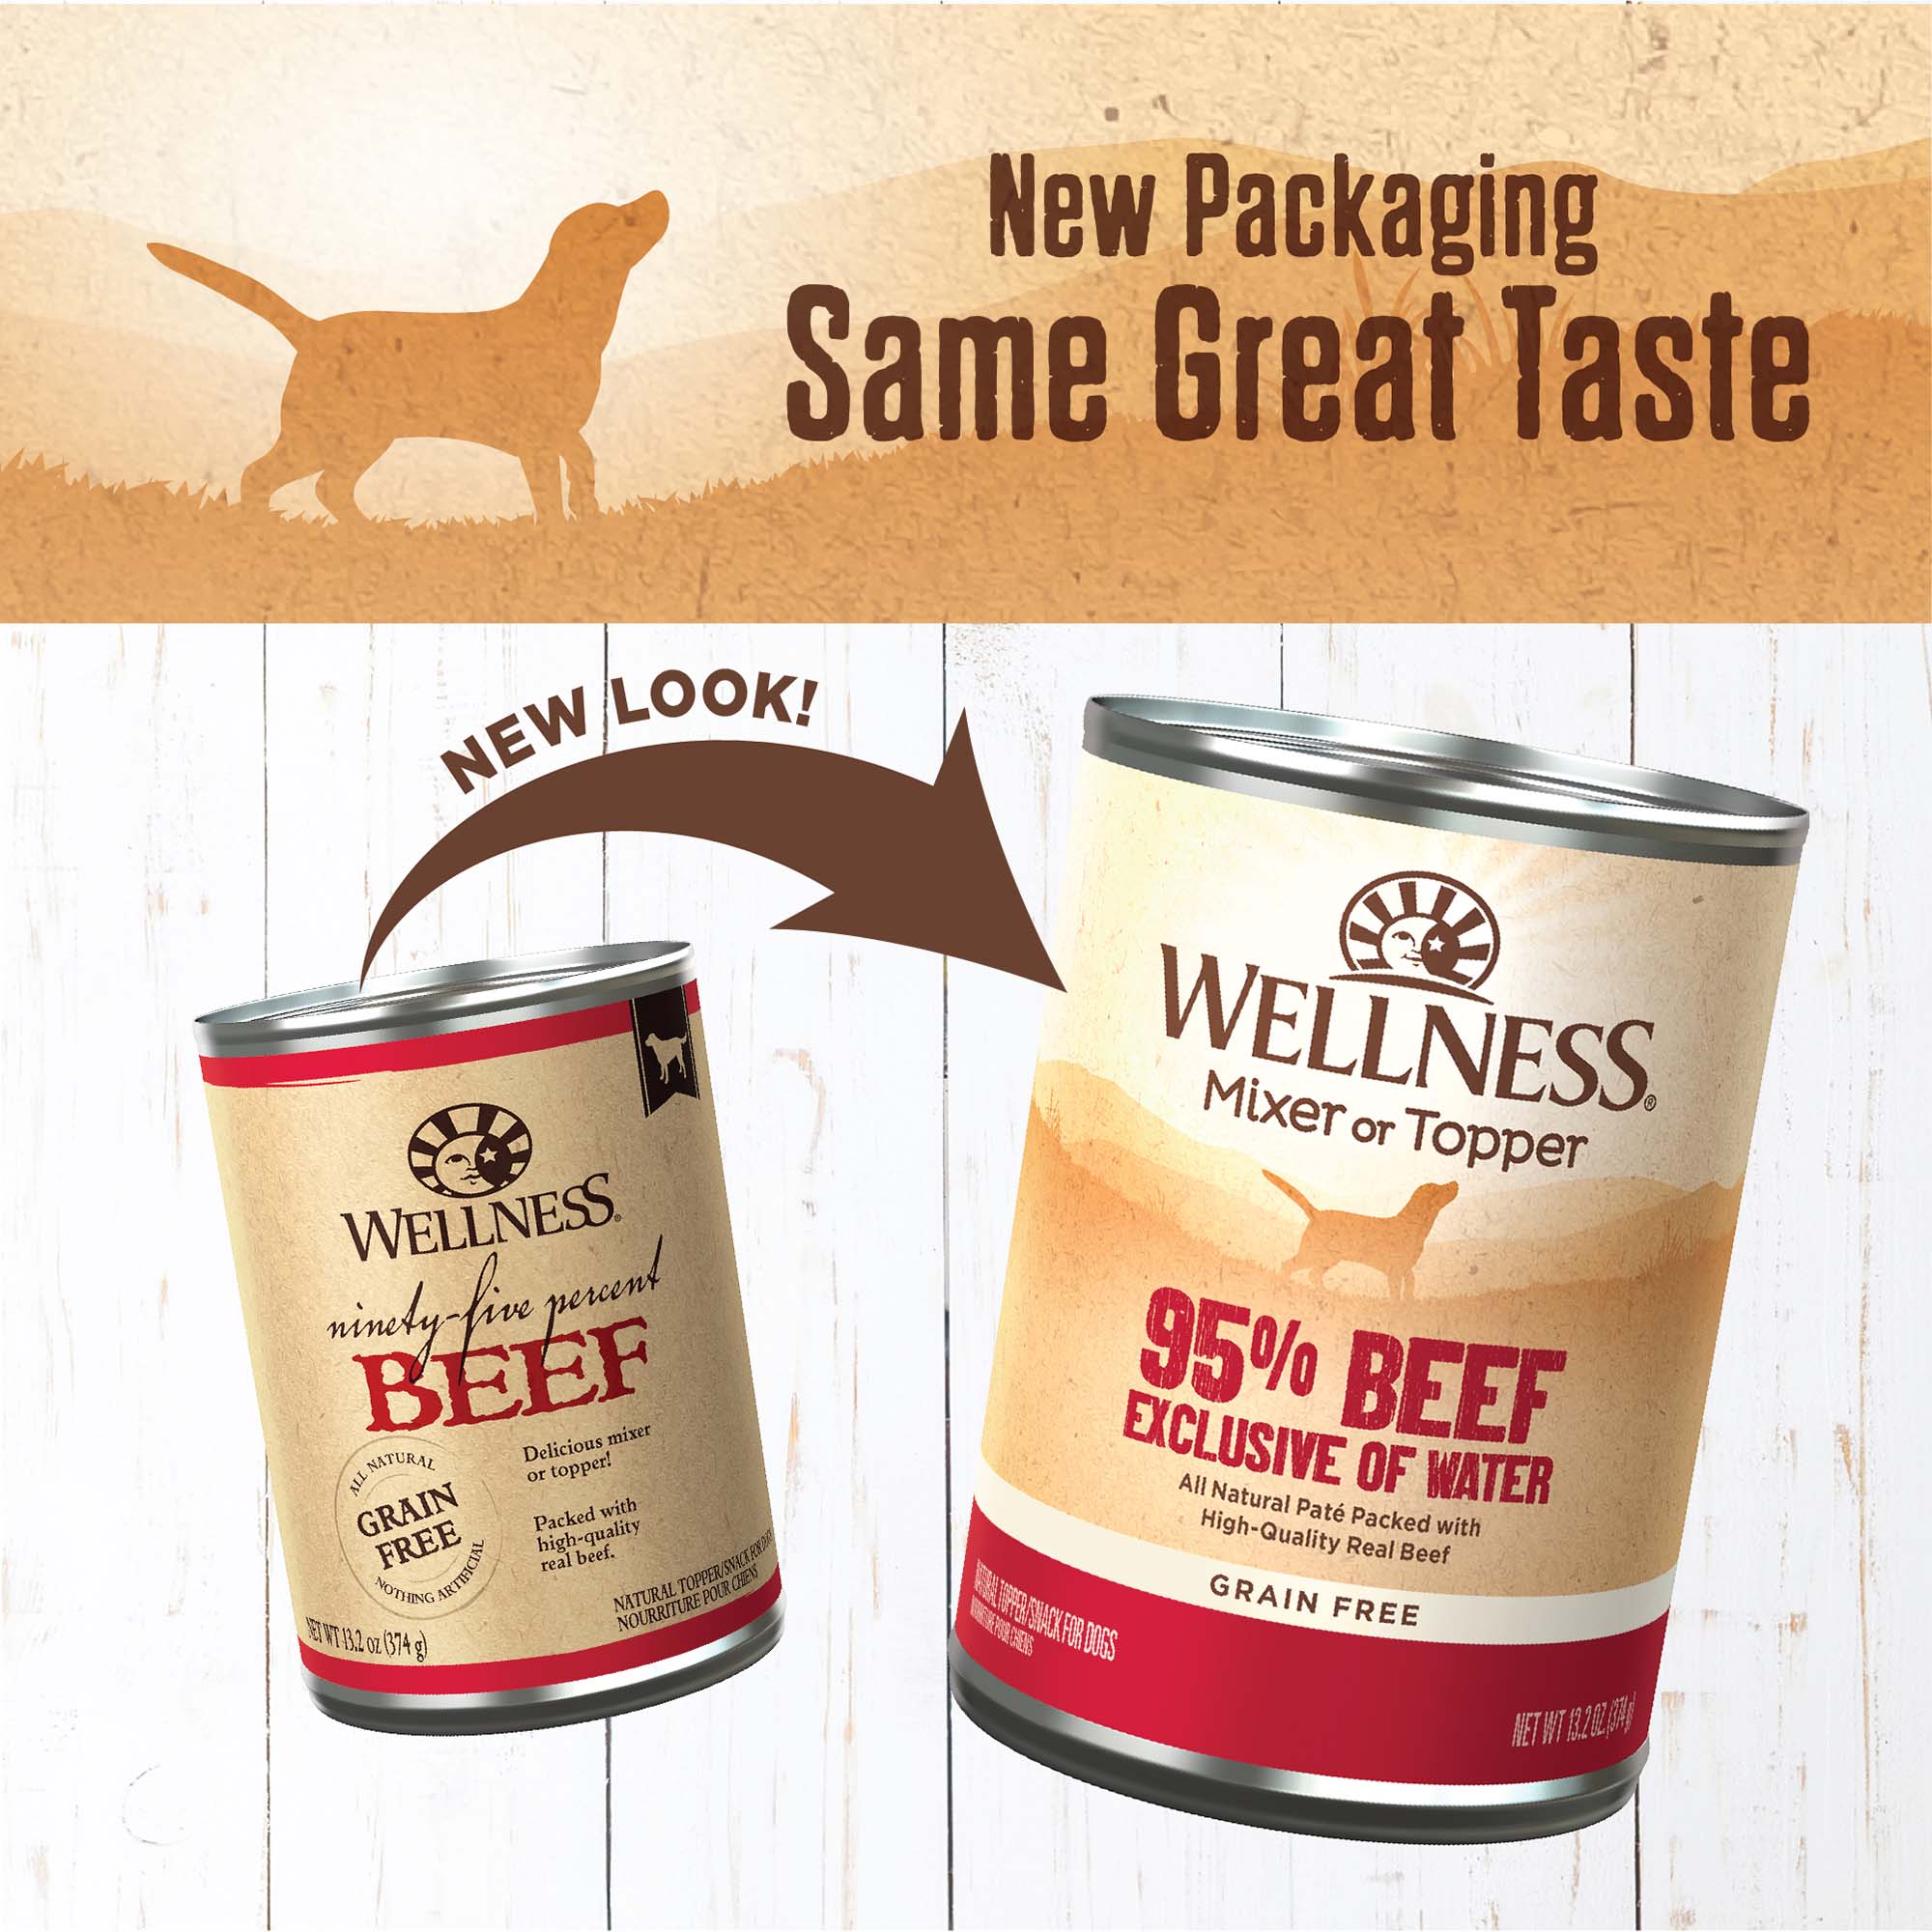 Wellness 95% Beef Natural Wet Grain Free Canned Dog Food, 13.2-Ounce Can (Pack of 12) - image 4 of 8